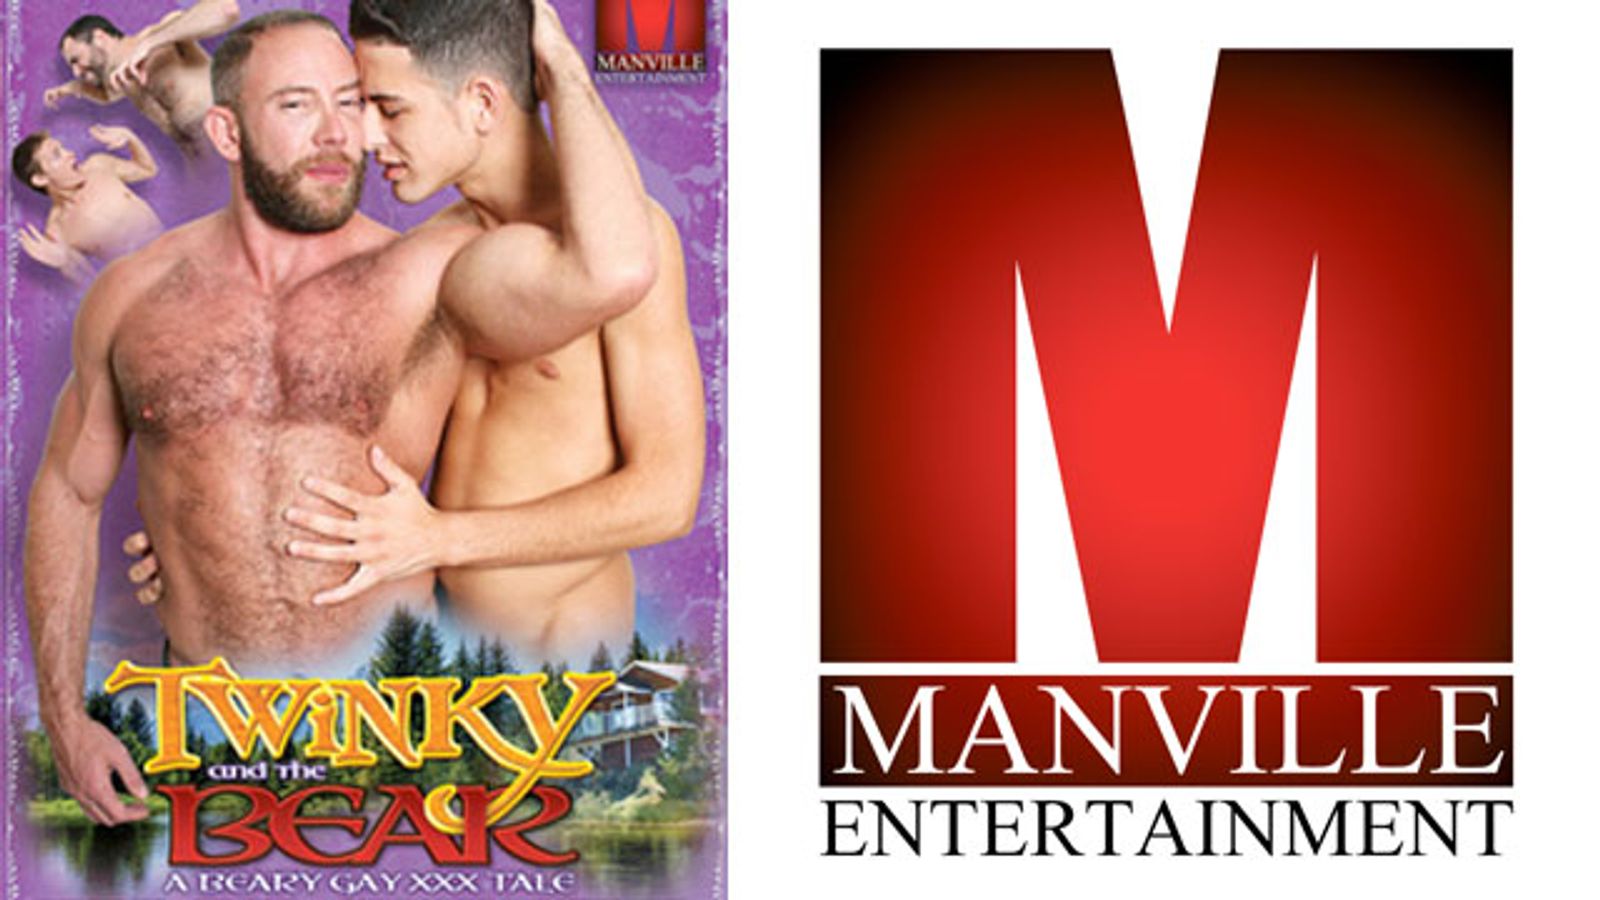 Manville Entertainment Releases Extras for 'Twinky and the Bear'